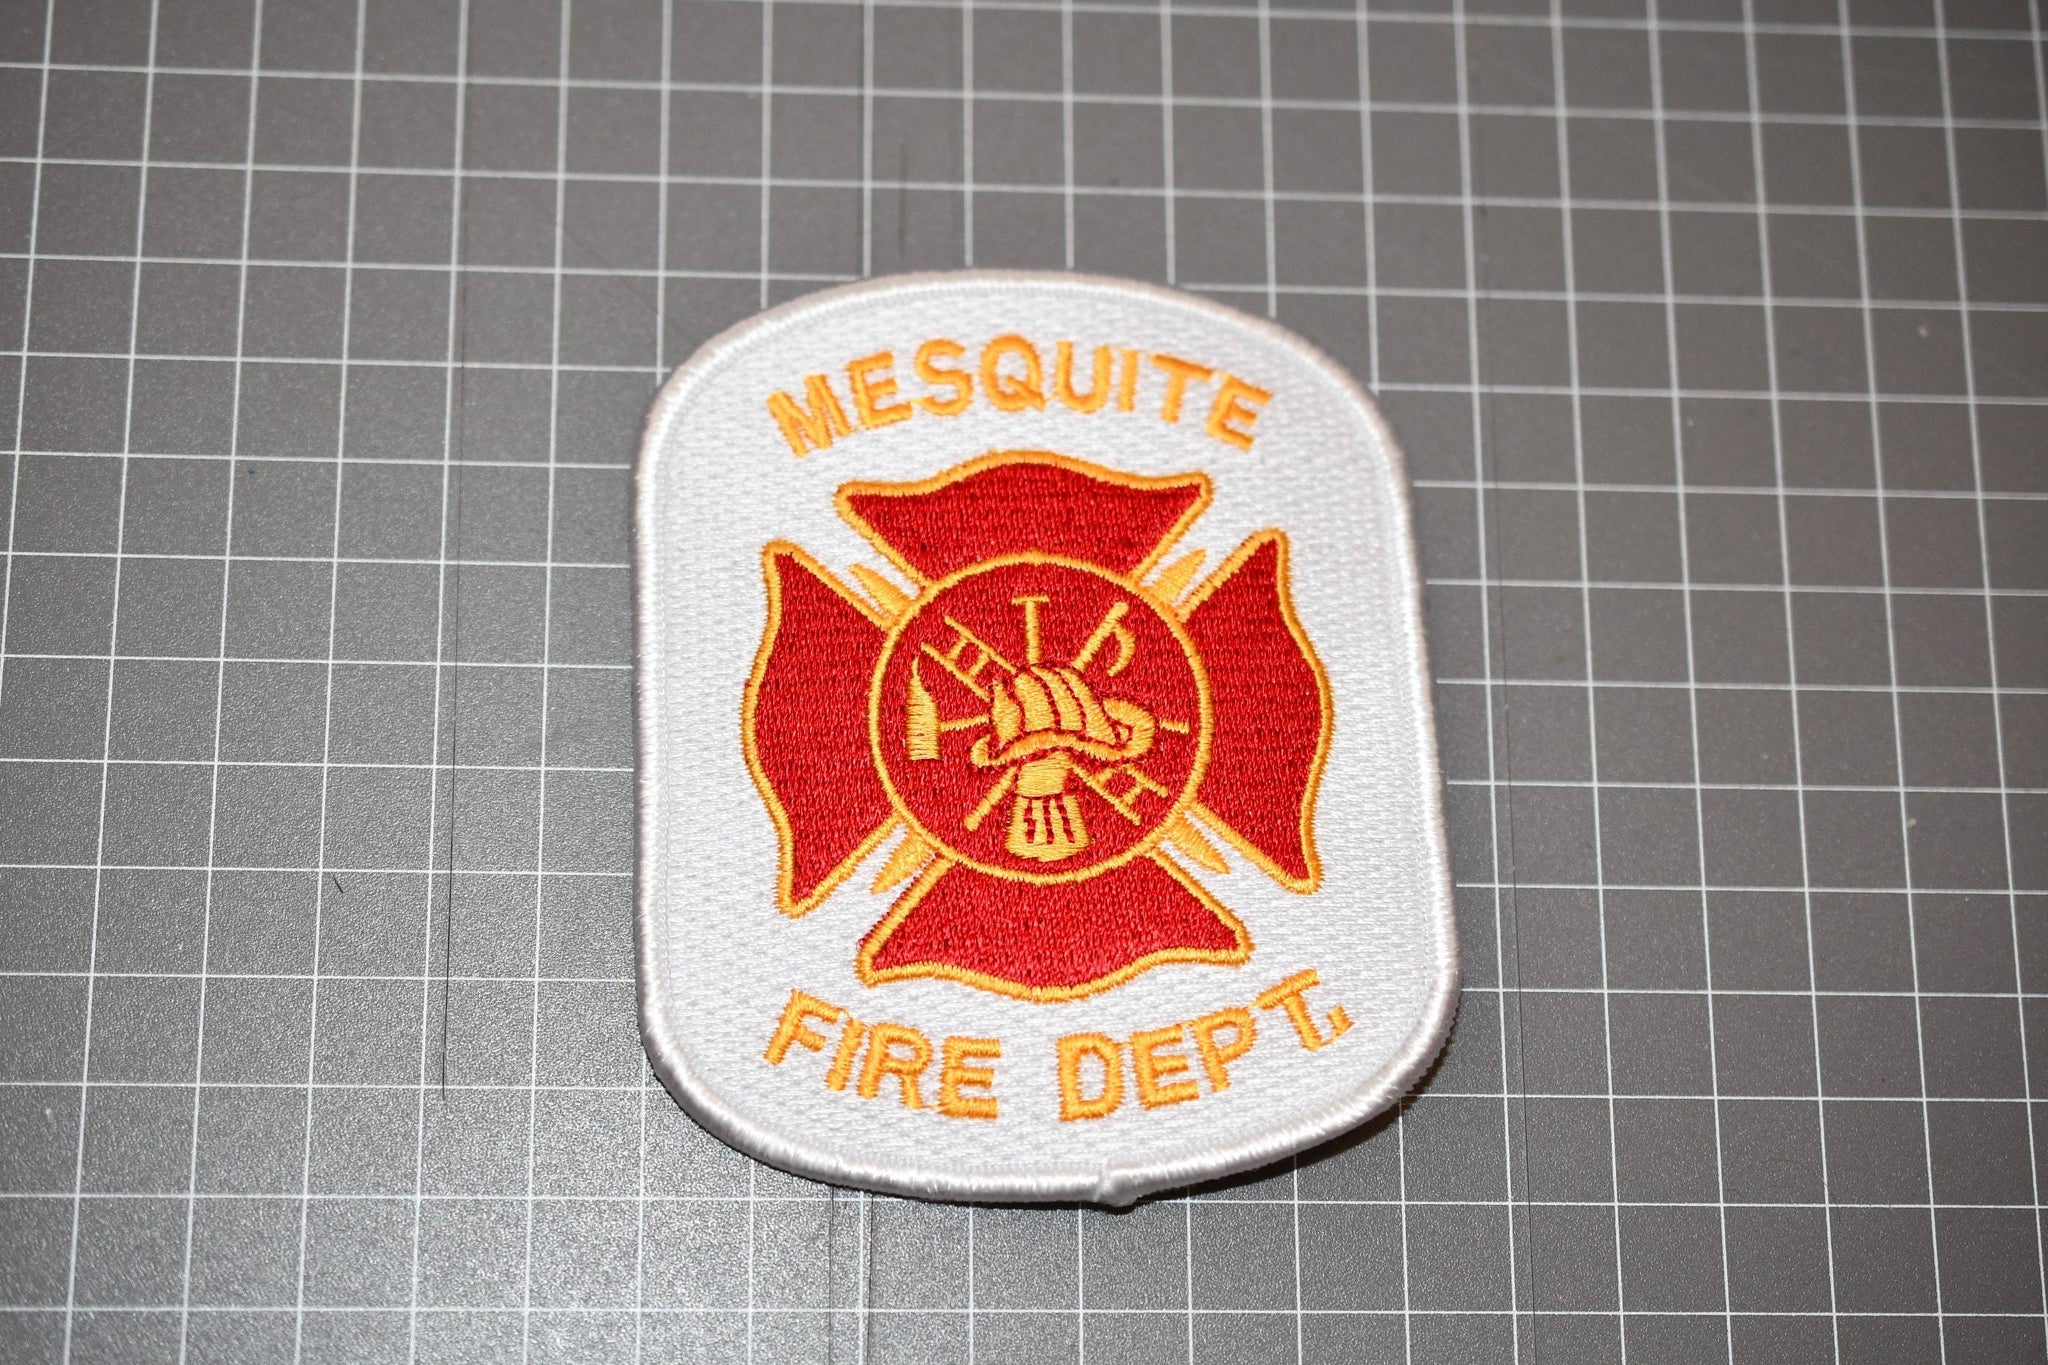 Mesquite Texas Fire Department Patch (U.S. Fire Patches)